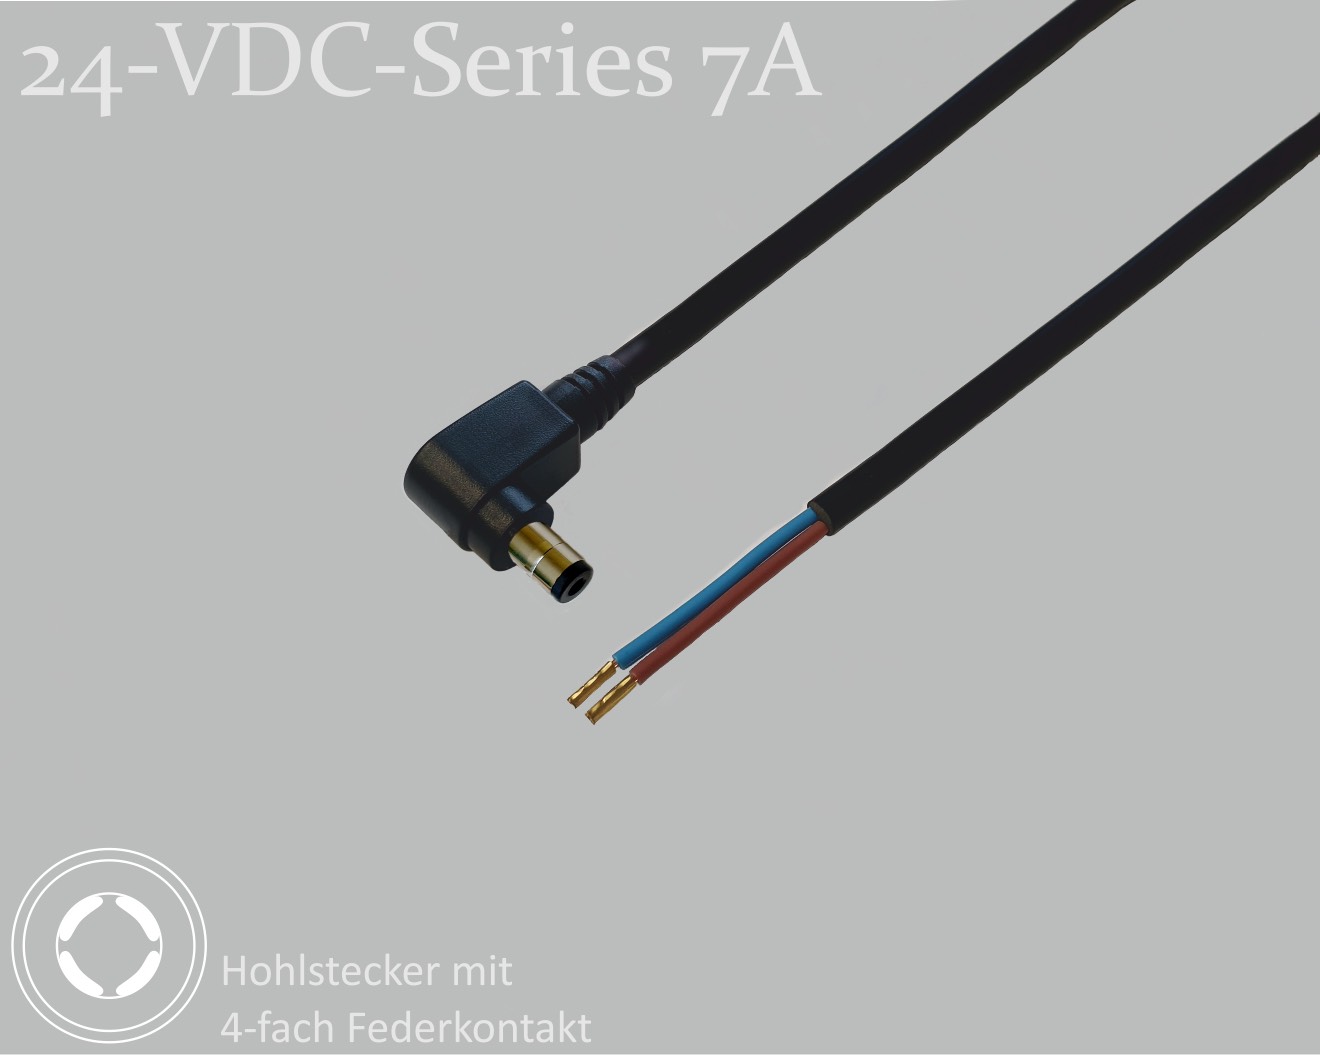 24-VDC-Series 7A, DC connection cable, DC right-angle plug with 4-spring contact 2.1x5.5x9.5mm, round cable 2x0.50mm², black, wire end sleeves, 1.5m